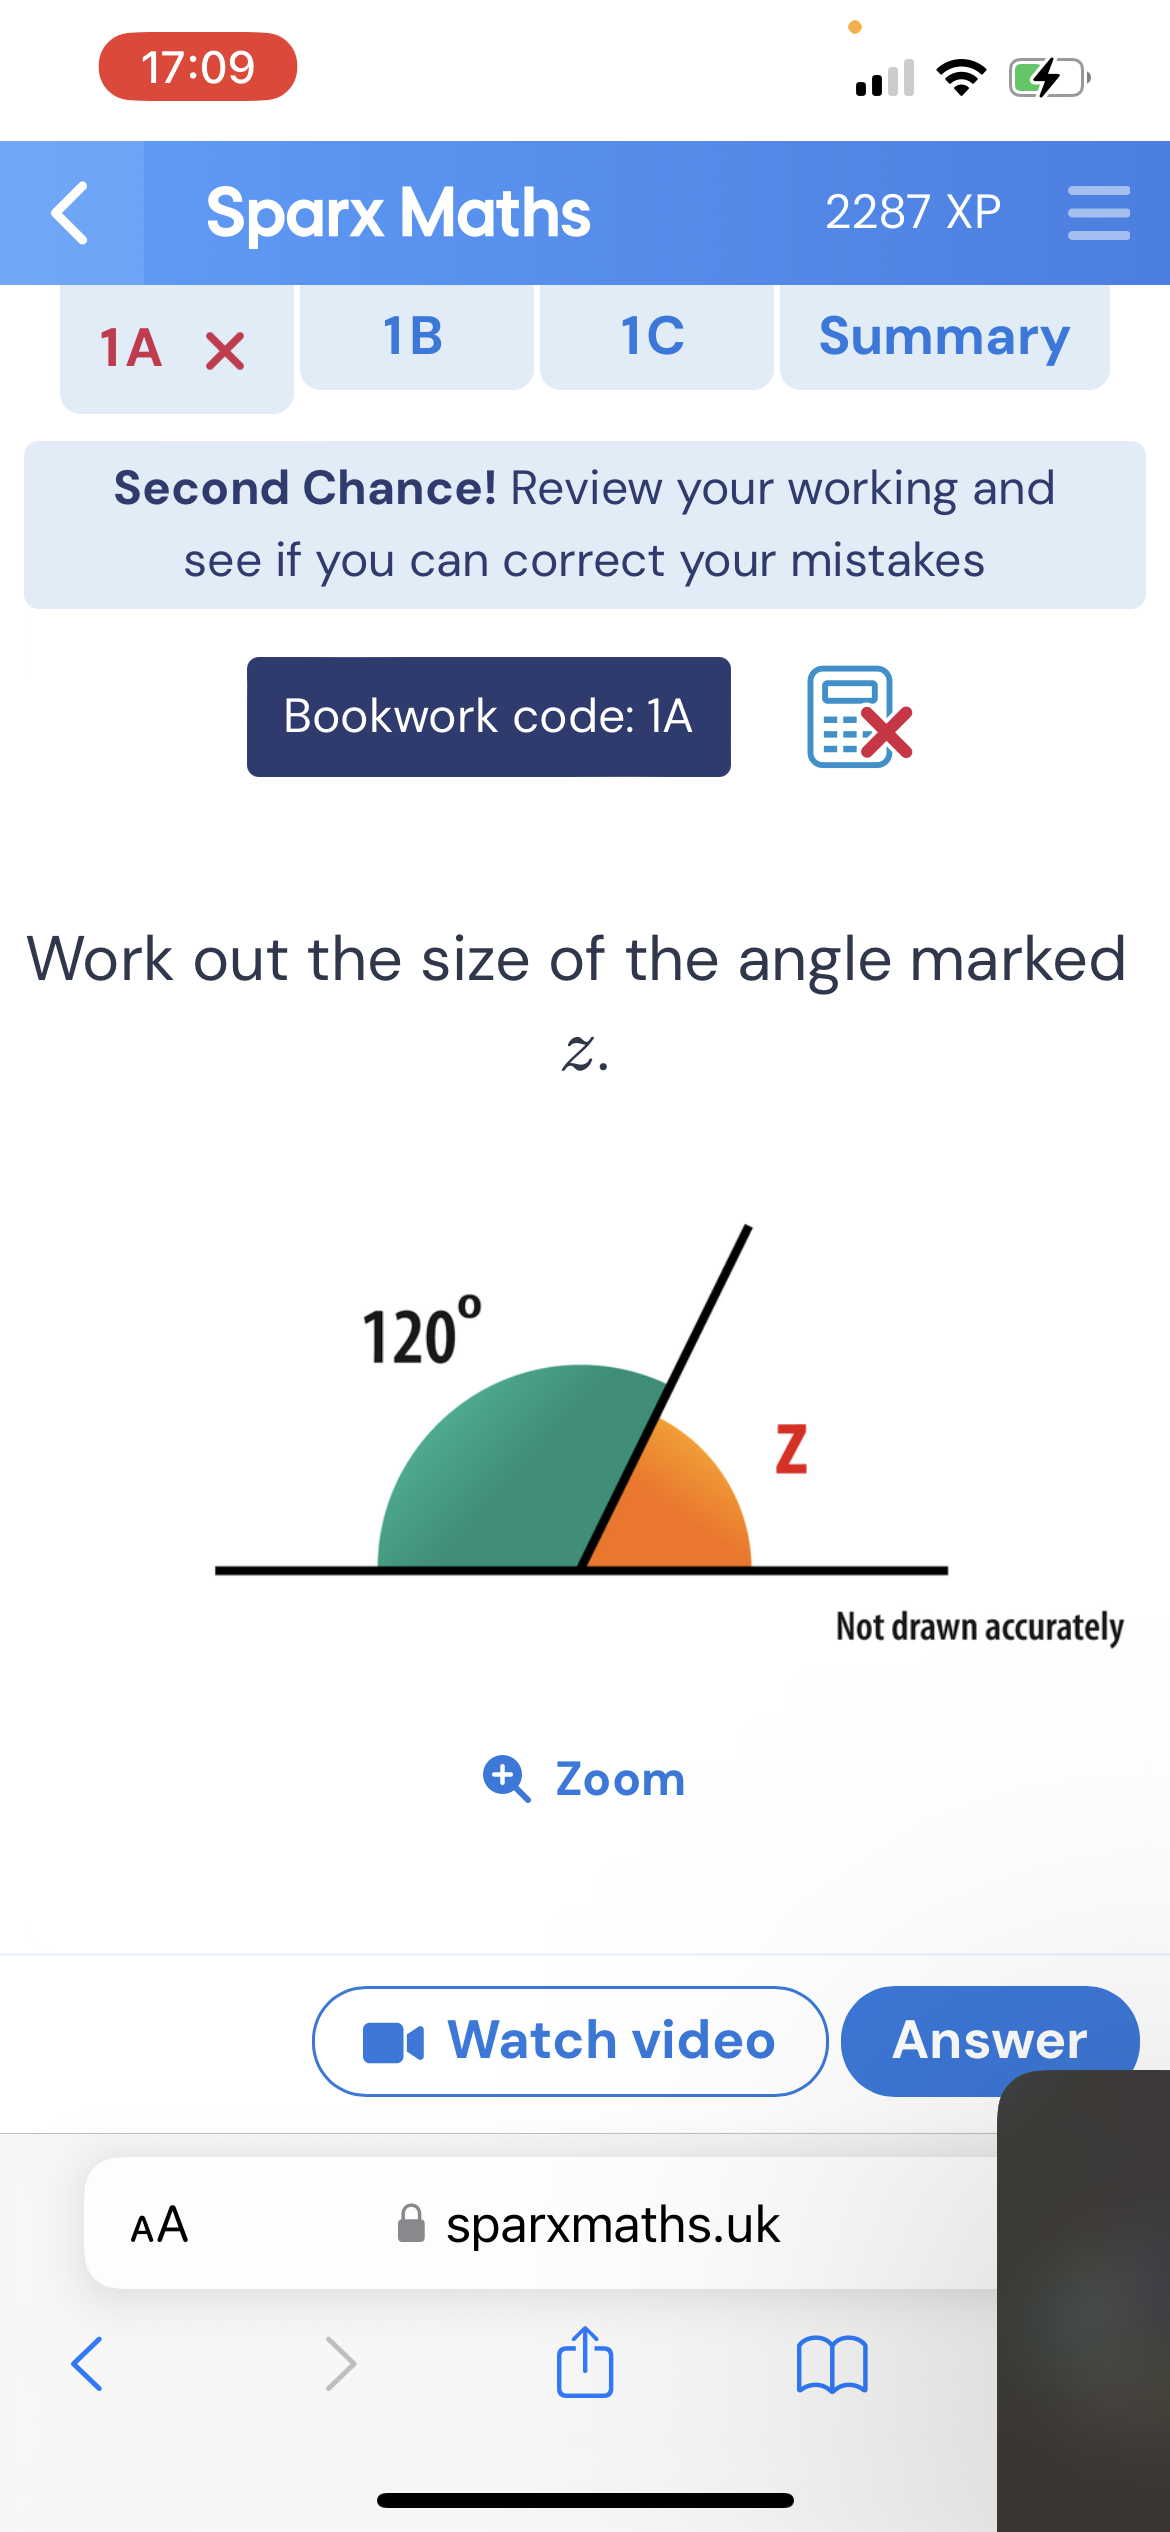 17:09
< Sparx Maths
2287 XP
1A X
1B
1C
Summary
Second Chance! Review your working and
see if you can correct your mistakes
Bookwork code: 1A
EX
Work out the size of the angle marked
Z.
<
AA
120º
Z
+ Zoom
Not drawn accurately
Watch video
Answer
⚫ sparxmaths.uk